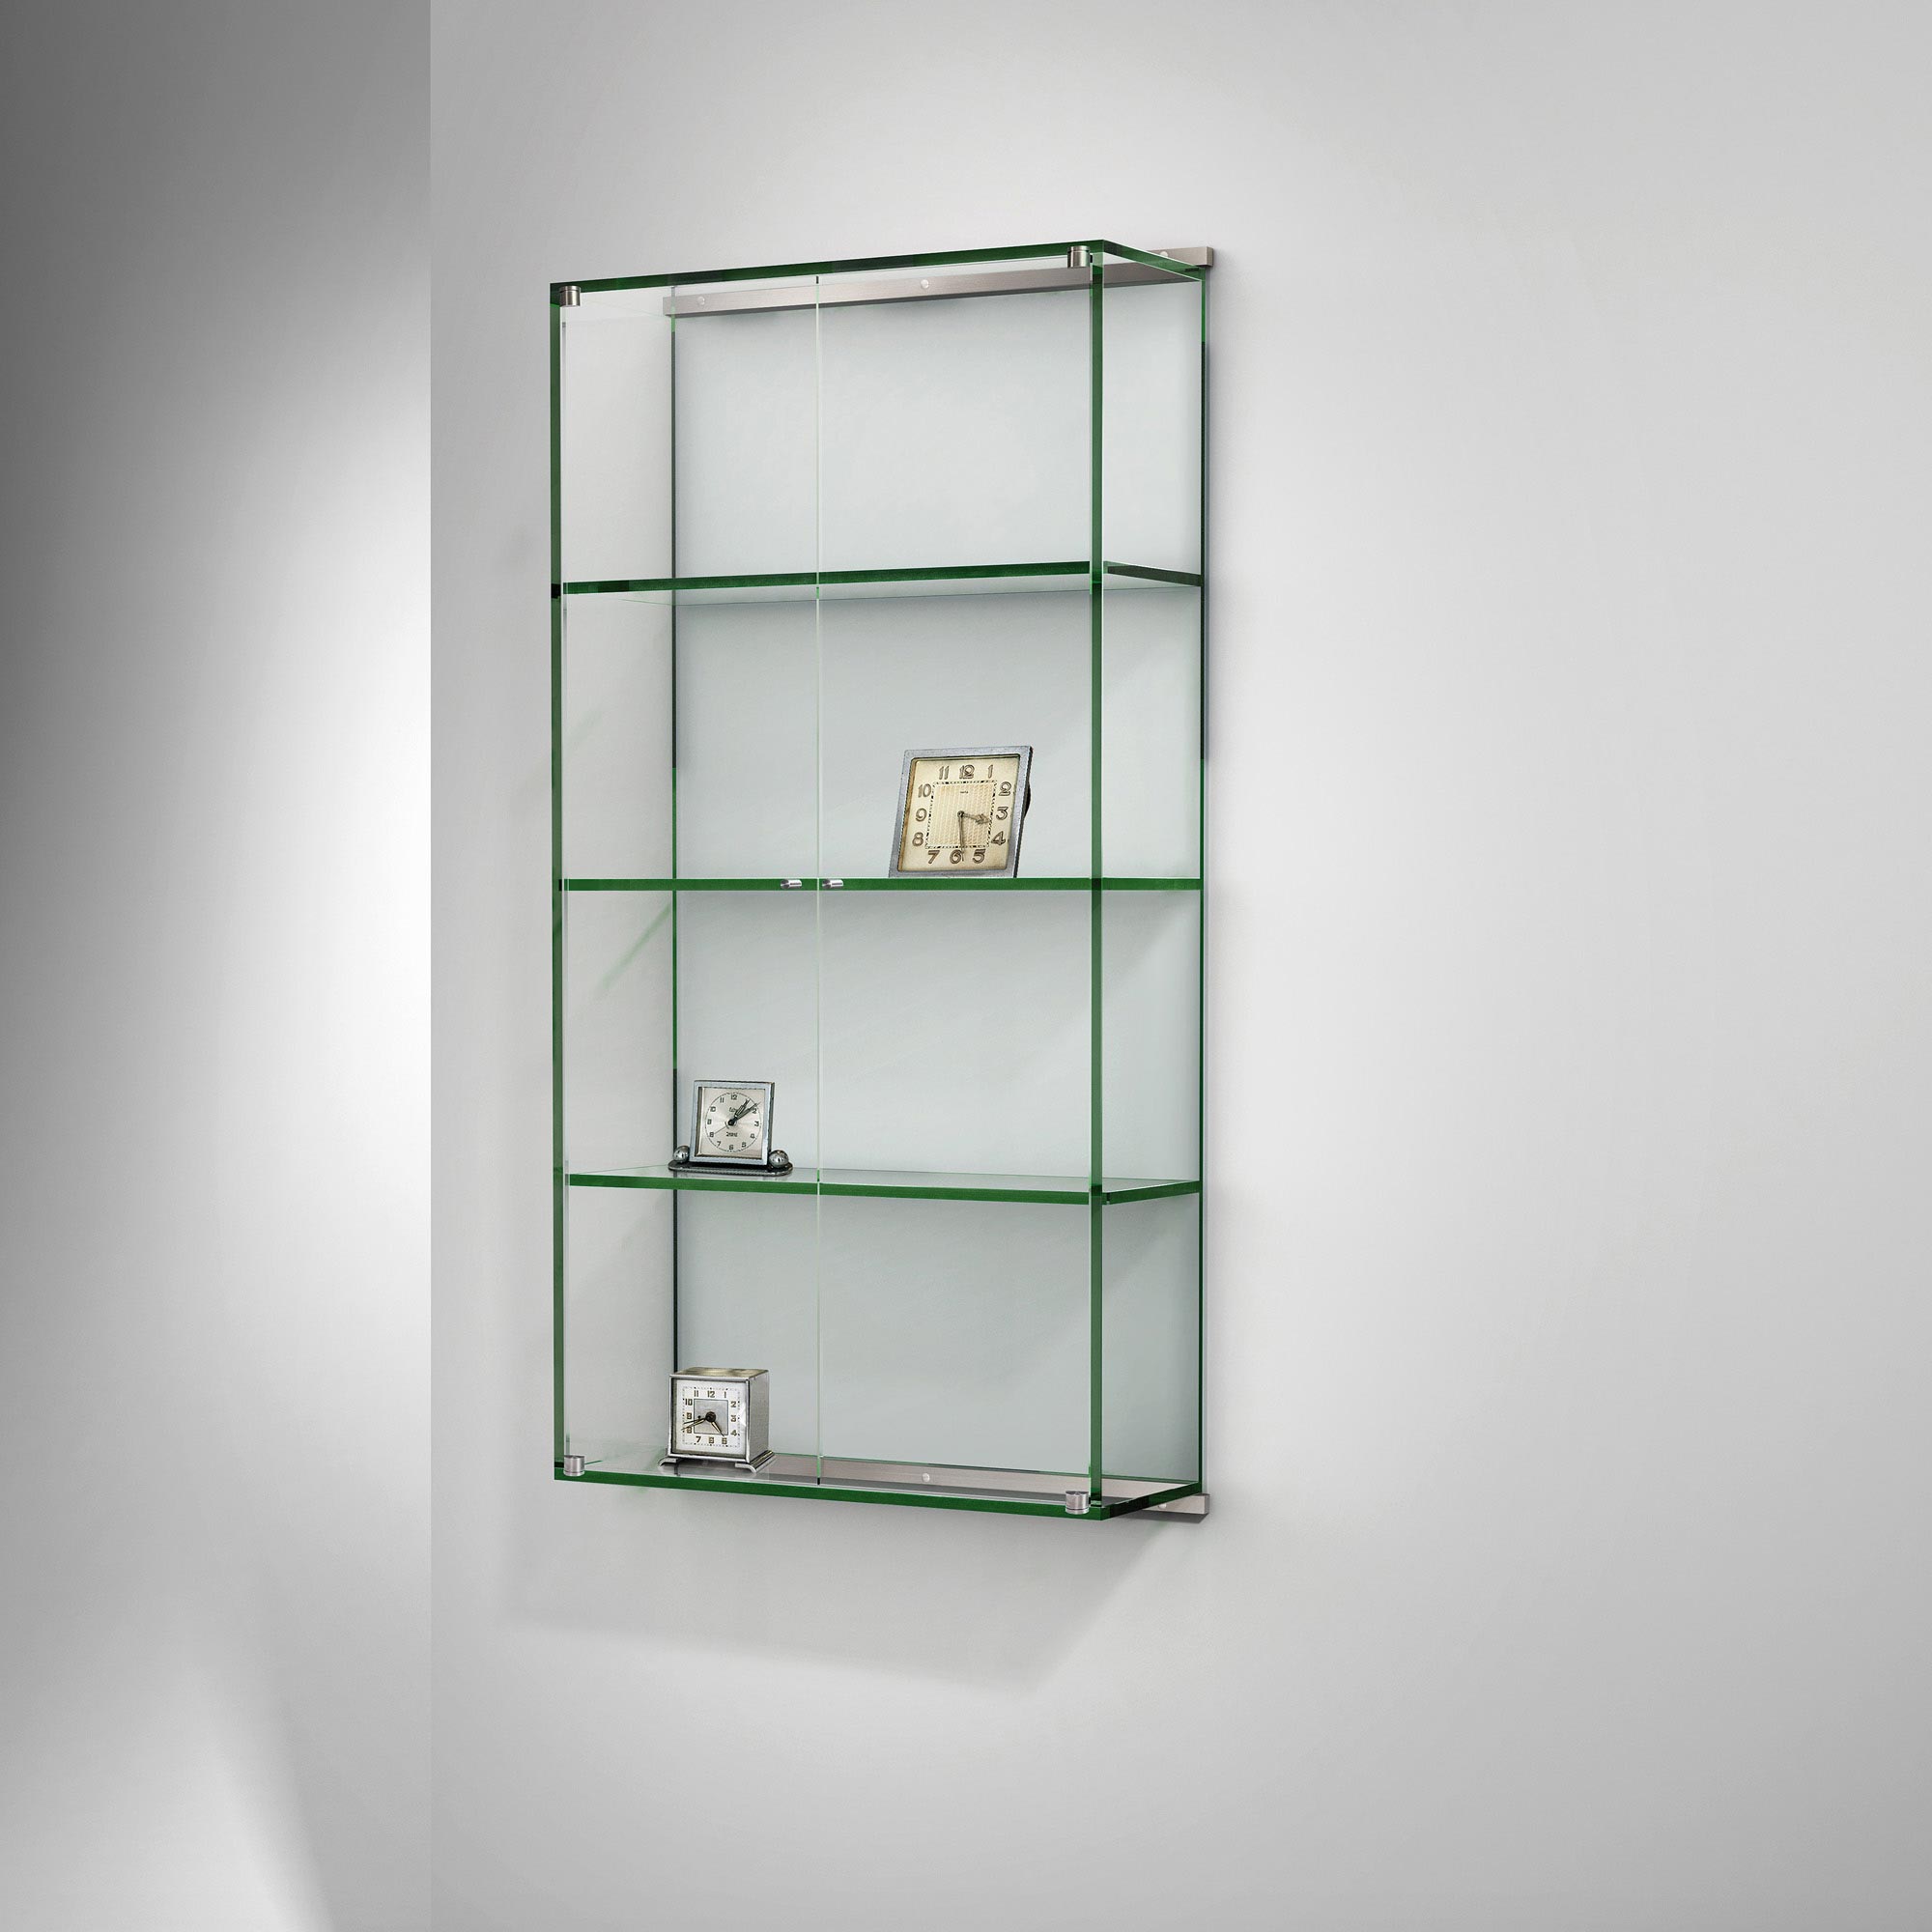 Wall Display Case By Dreieck Design, Shelves With Glass